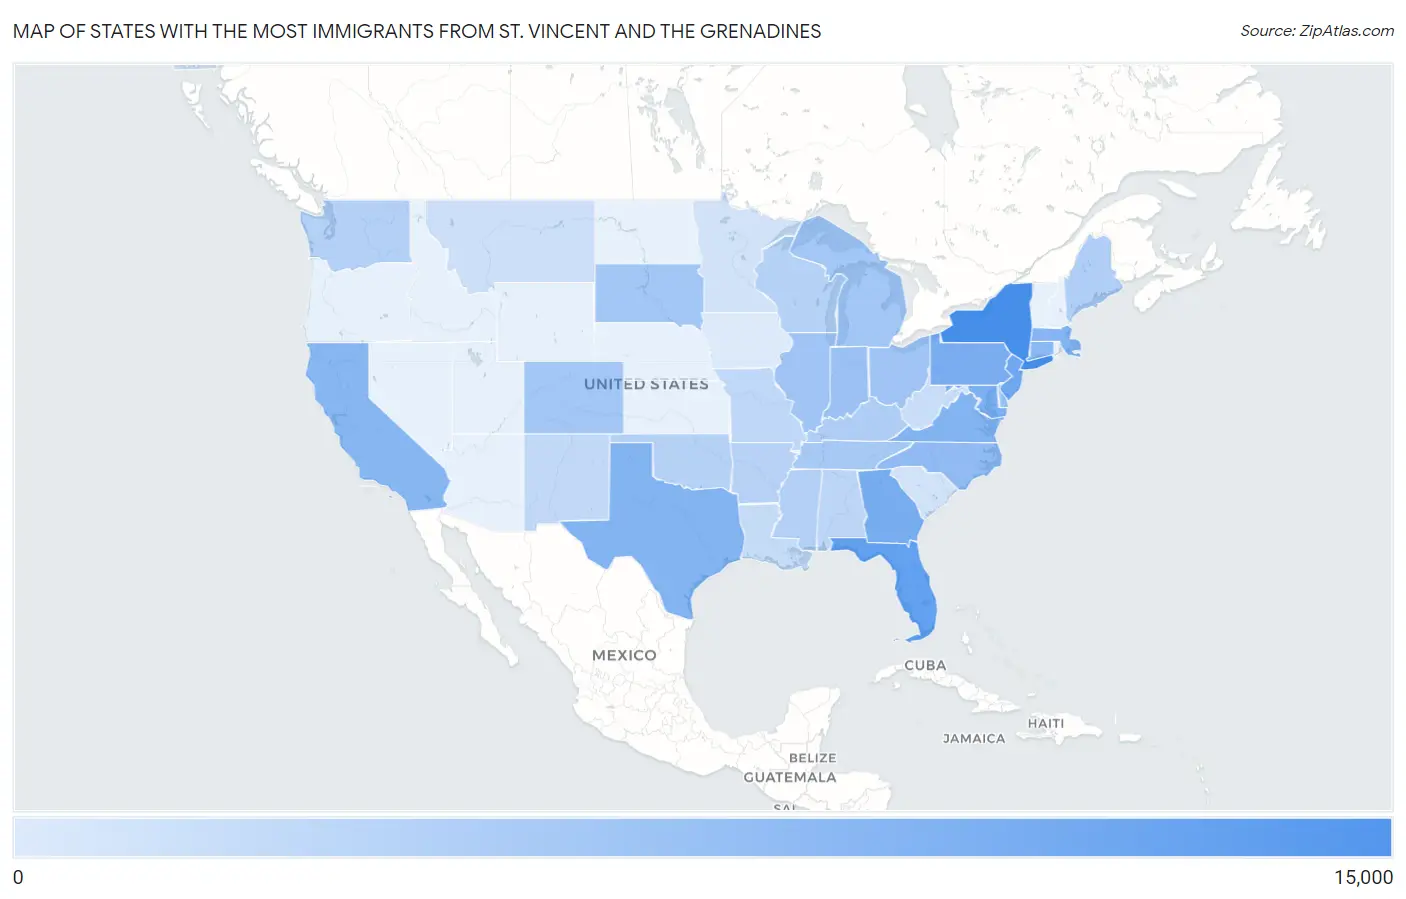 States with the Most Immigrants from St. Vincent and the Grenadines in the United States Map